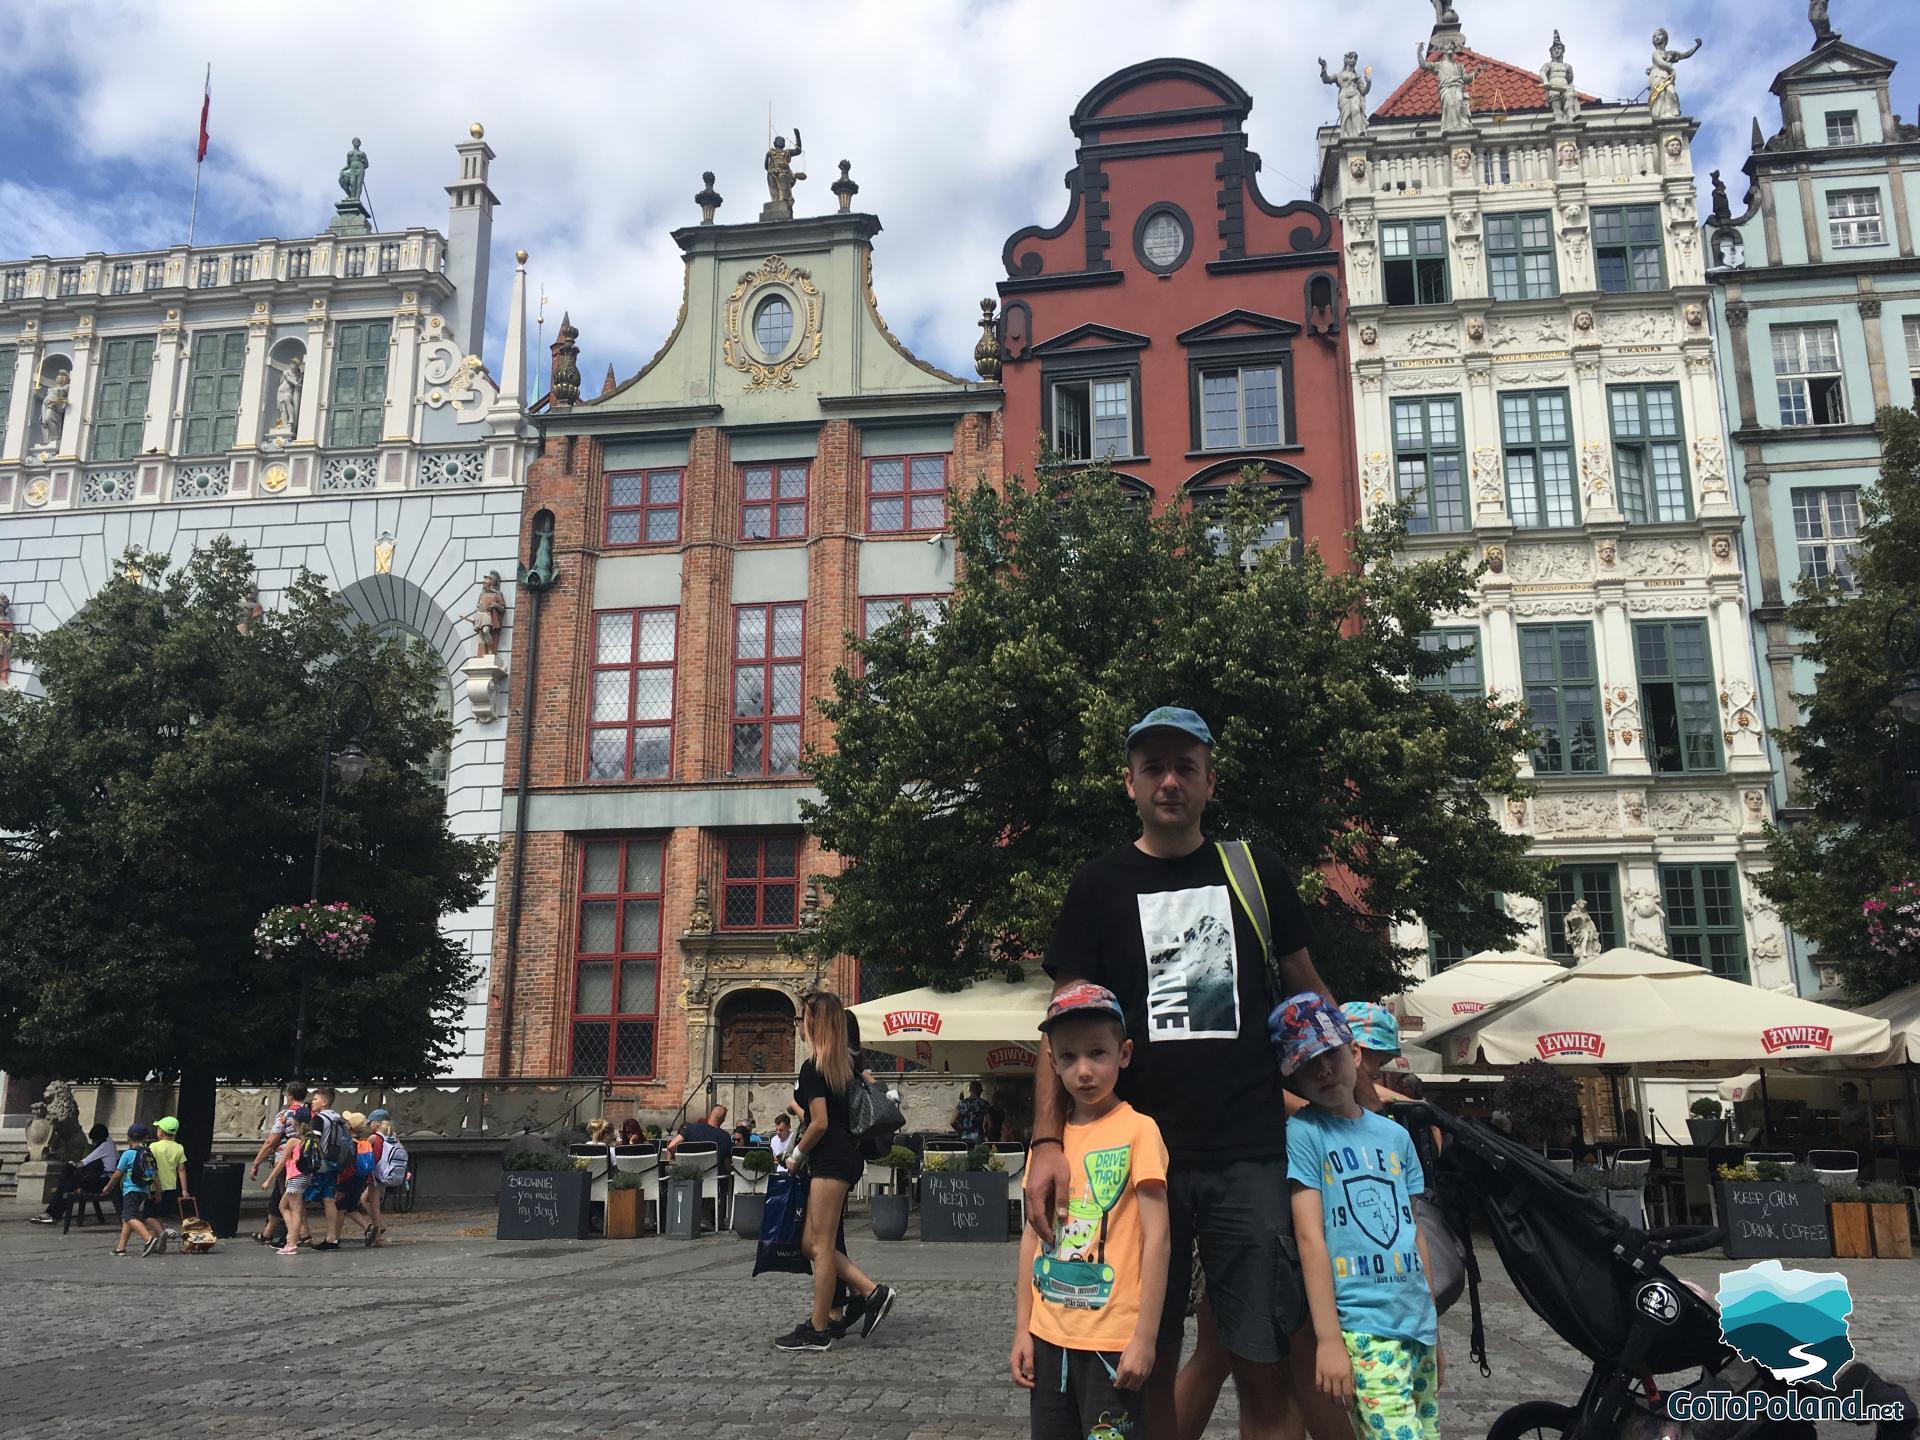 a man and two children are in the Old Market square, behind them are three trees and colourful tenement houses